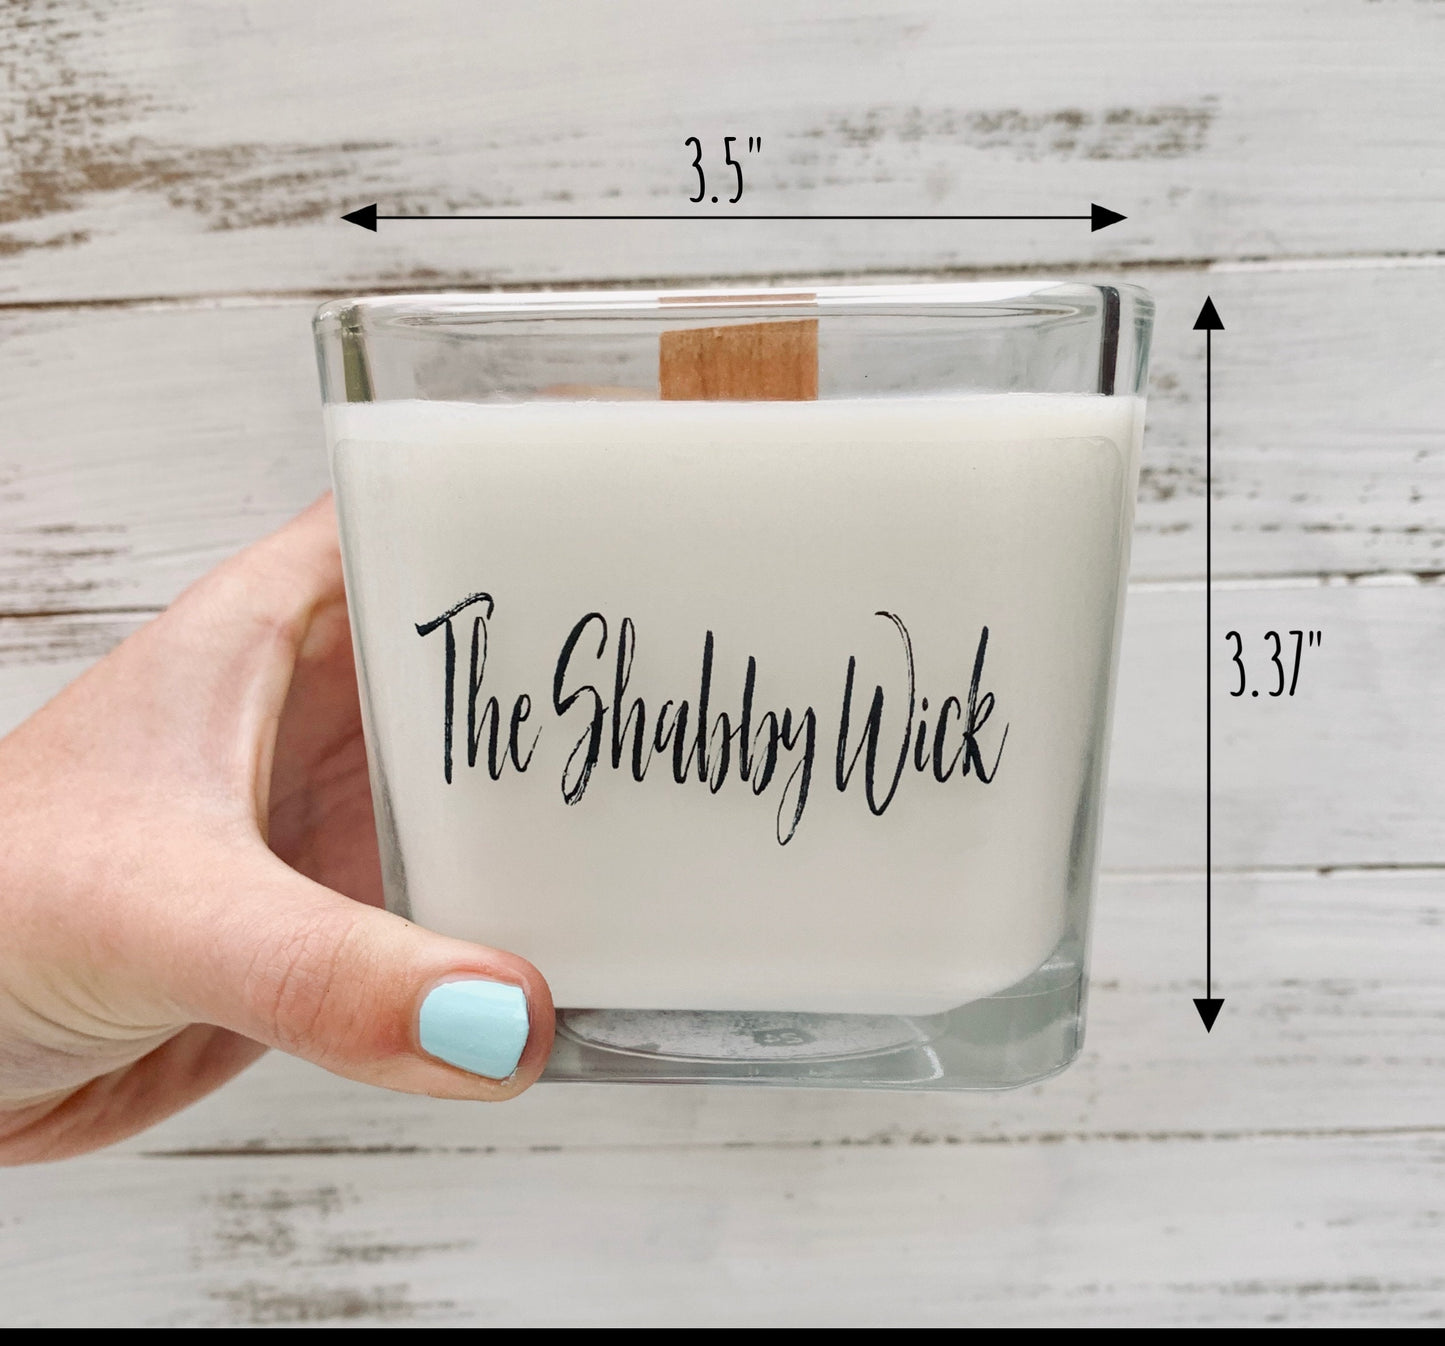 It's Fine I'm Fine Everything's Fine Candle, Stress Relief Candle, Personalized Scented Soy Candle, - TheShabbyWick